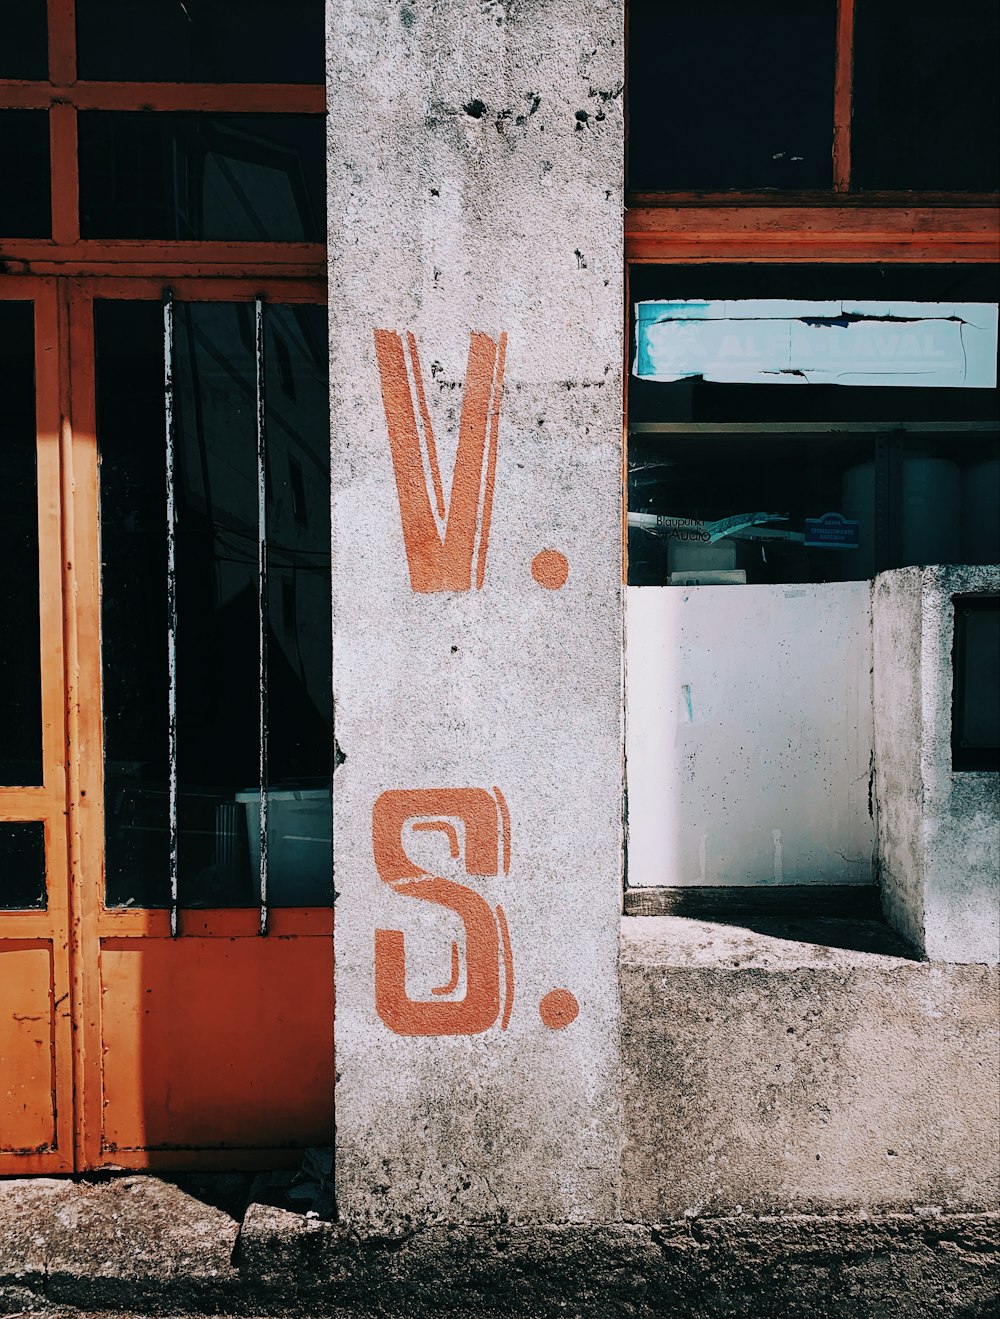 a concrete pillar with the word sv painted on it